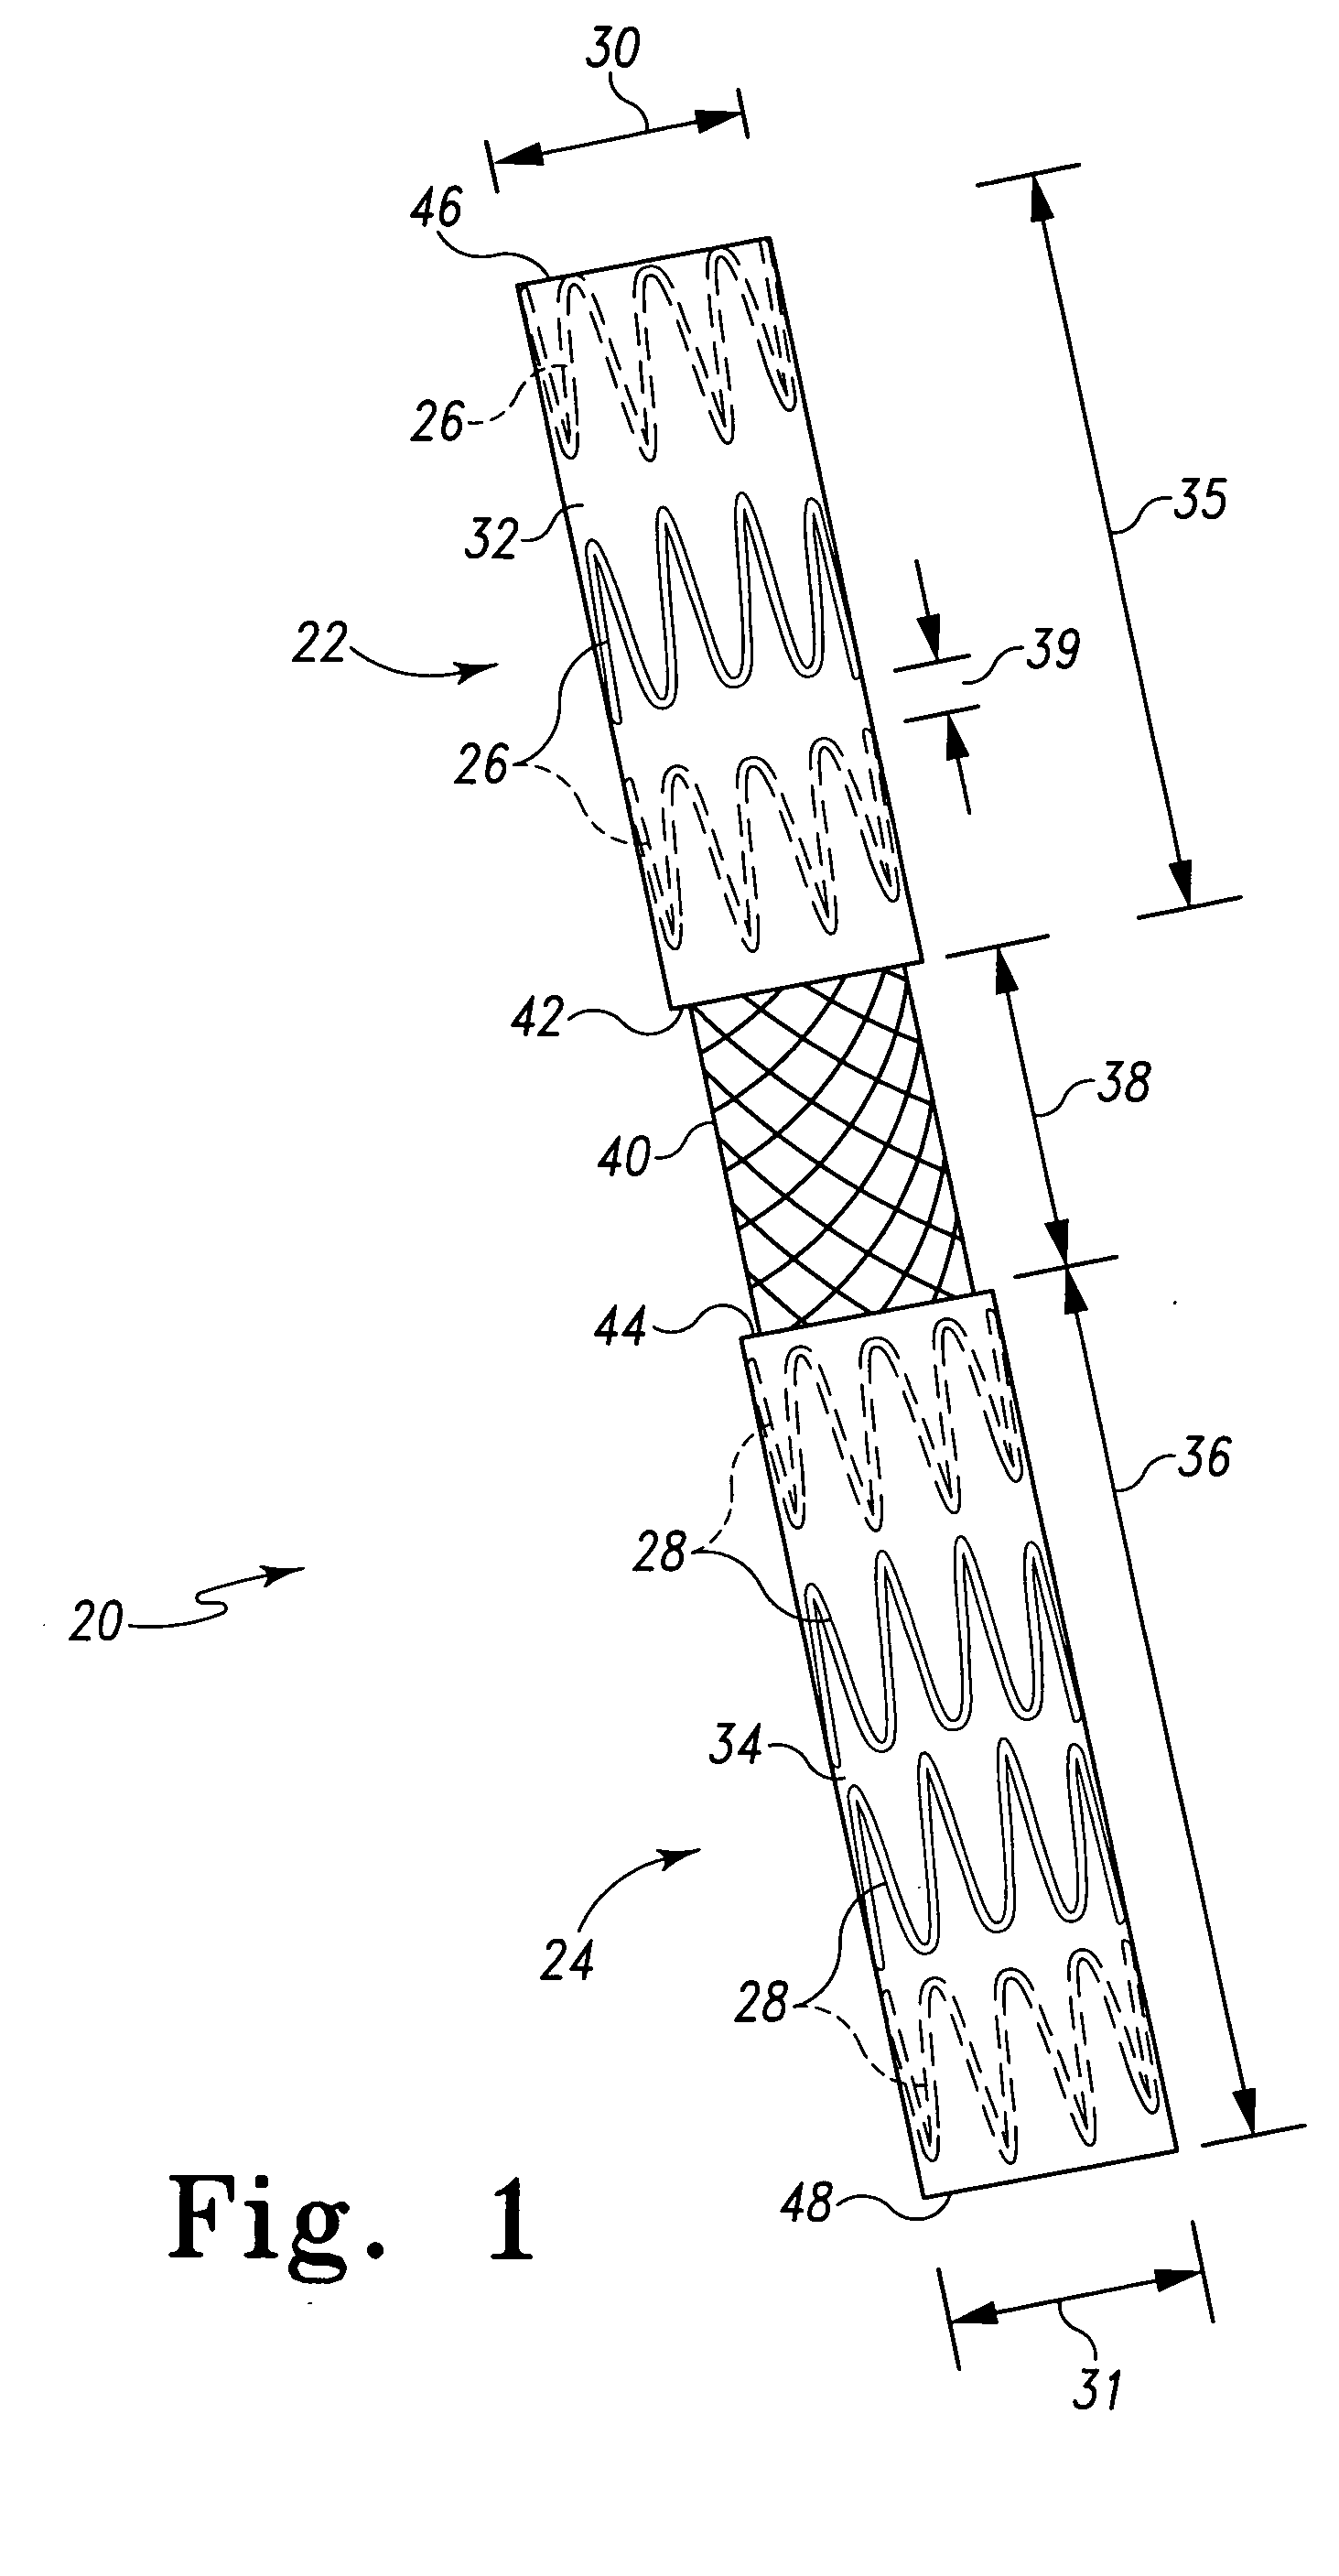 Interconnected leg extensions for an endoluminal prosthesis